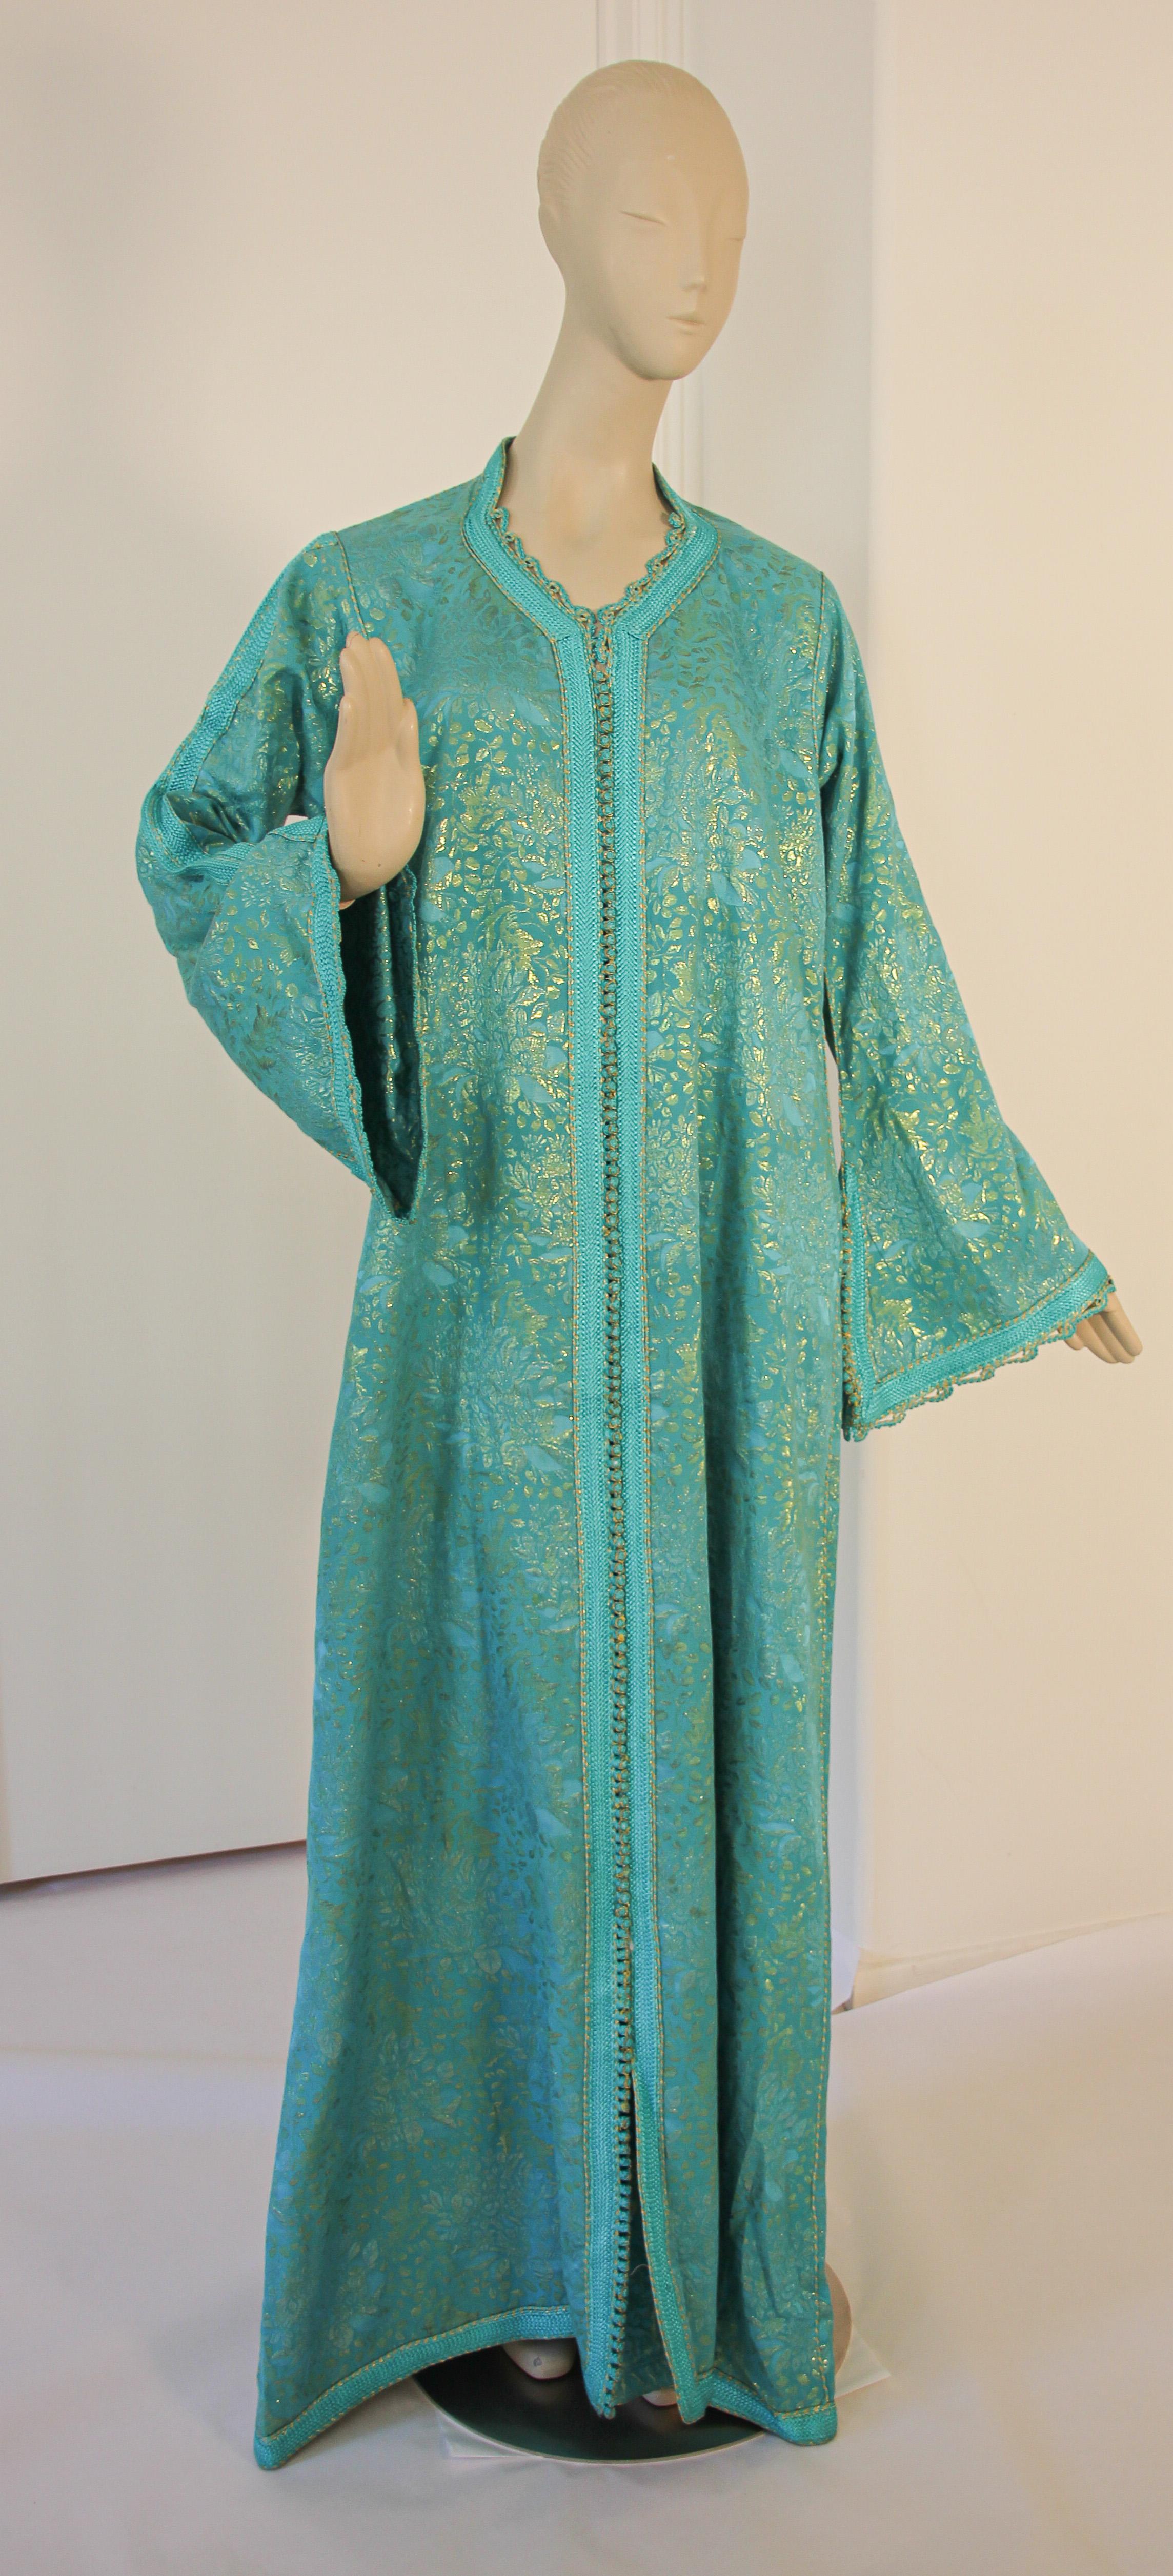 Stunning and elegant Moroccan caftan with metallic blue silk brocade.
handmade in Morocco and tailored for a relaxed fit with wide sleeves
This long maxi dress kaftan is embroidered and embellished entirely by hand.
The kaftan features a